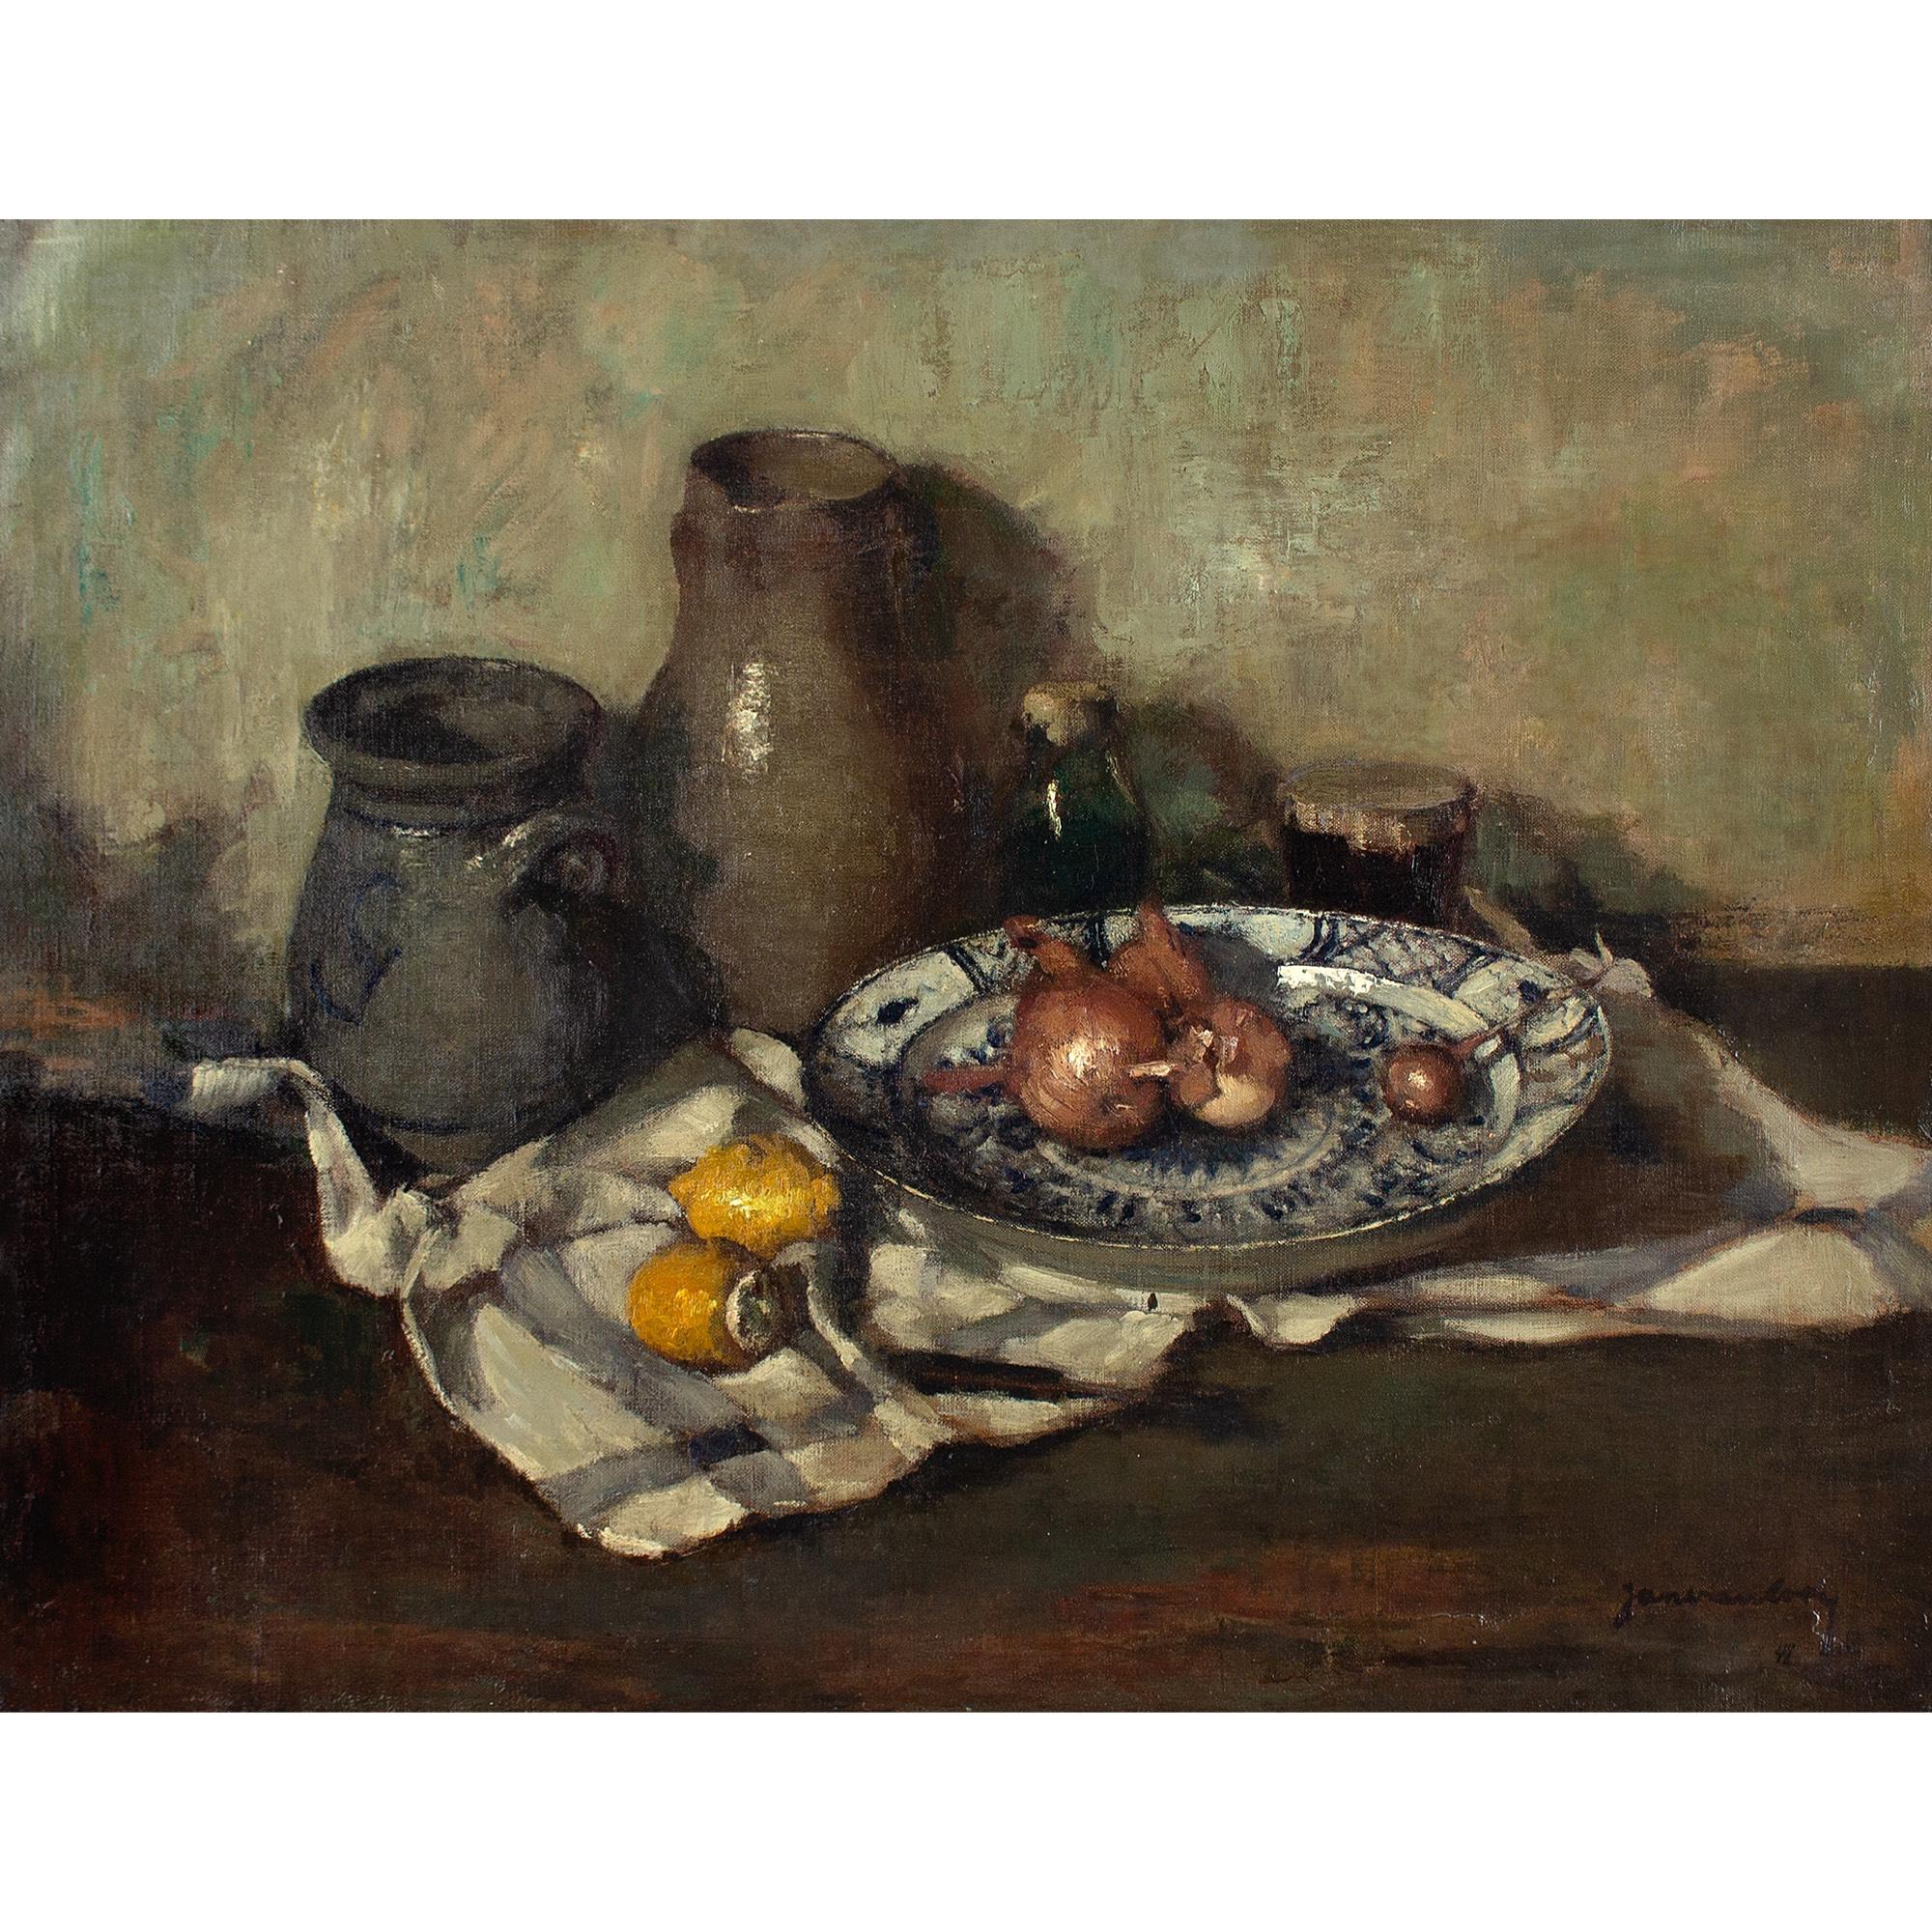 This painterly mid-20th-century oil painting by Belgian artist Jan Van Looy (1882-1971) depicts a still life with ceramics, onions, lemons and tablecloth.

Rendered with passion and acumen, this earthy assortment of objects is far from lifeless. Van